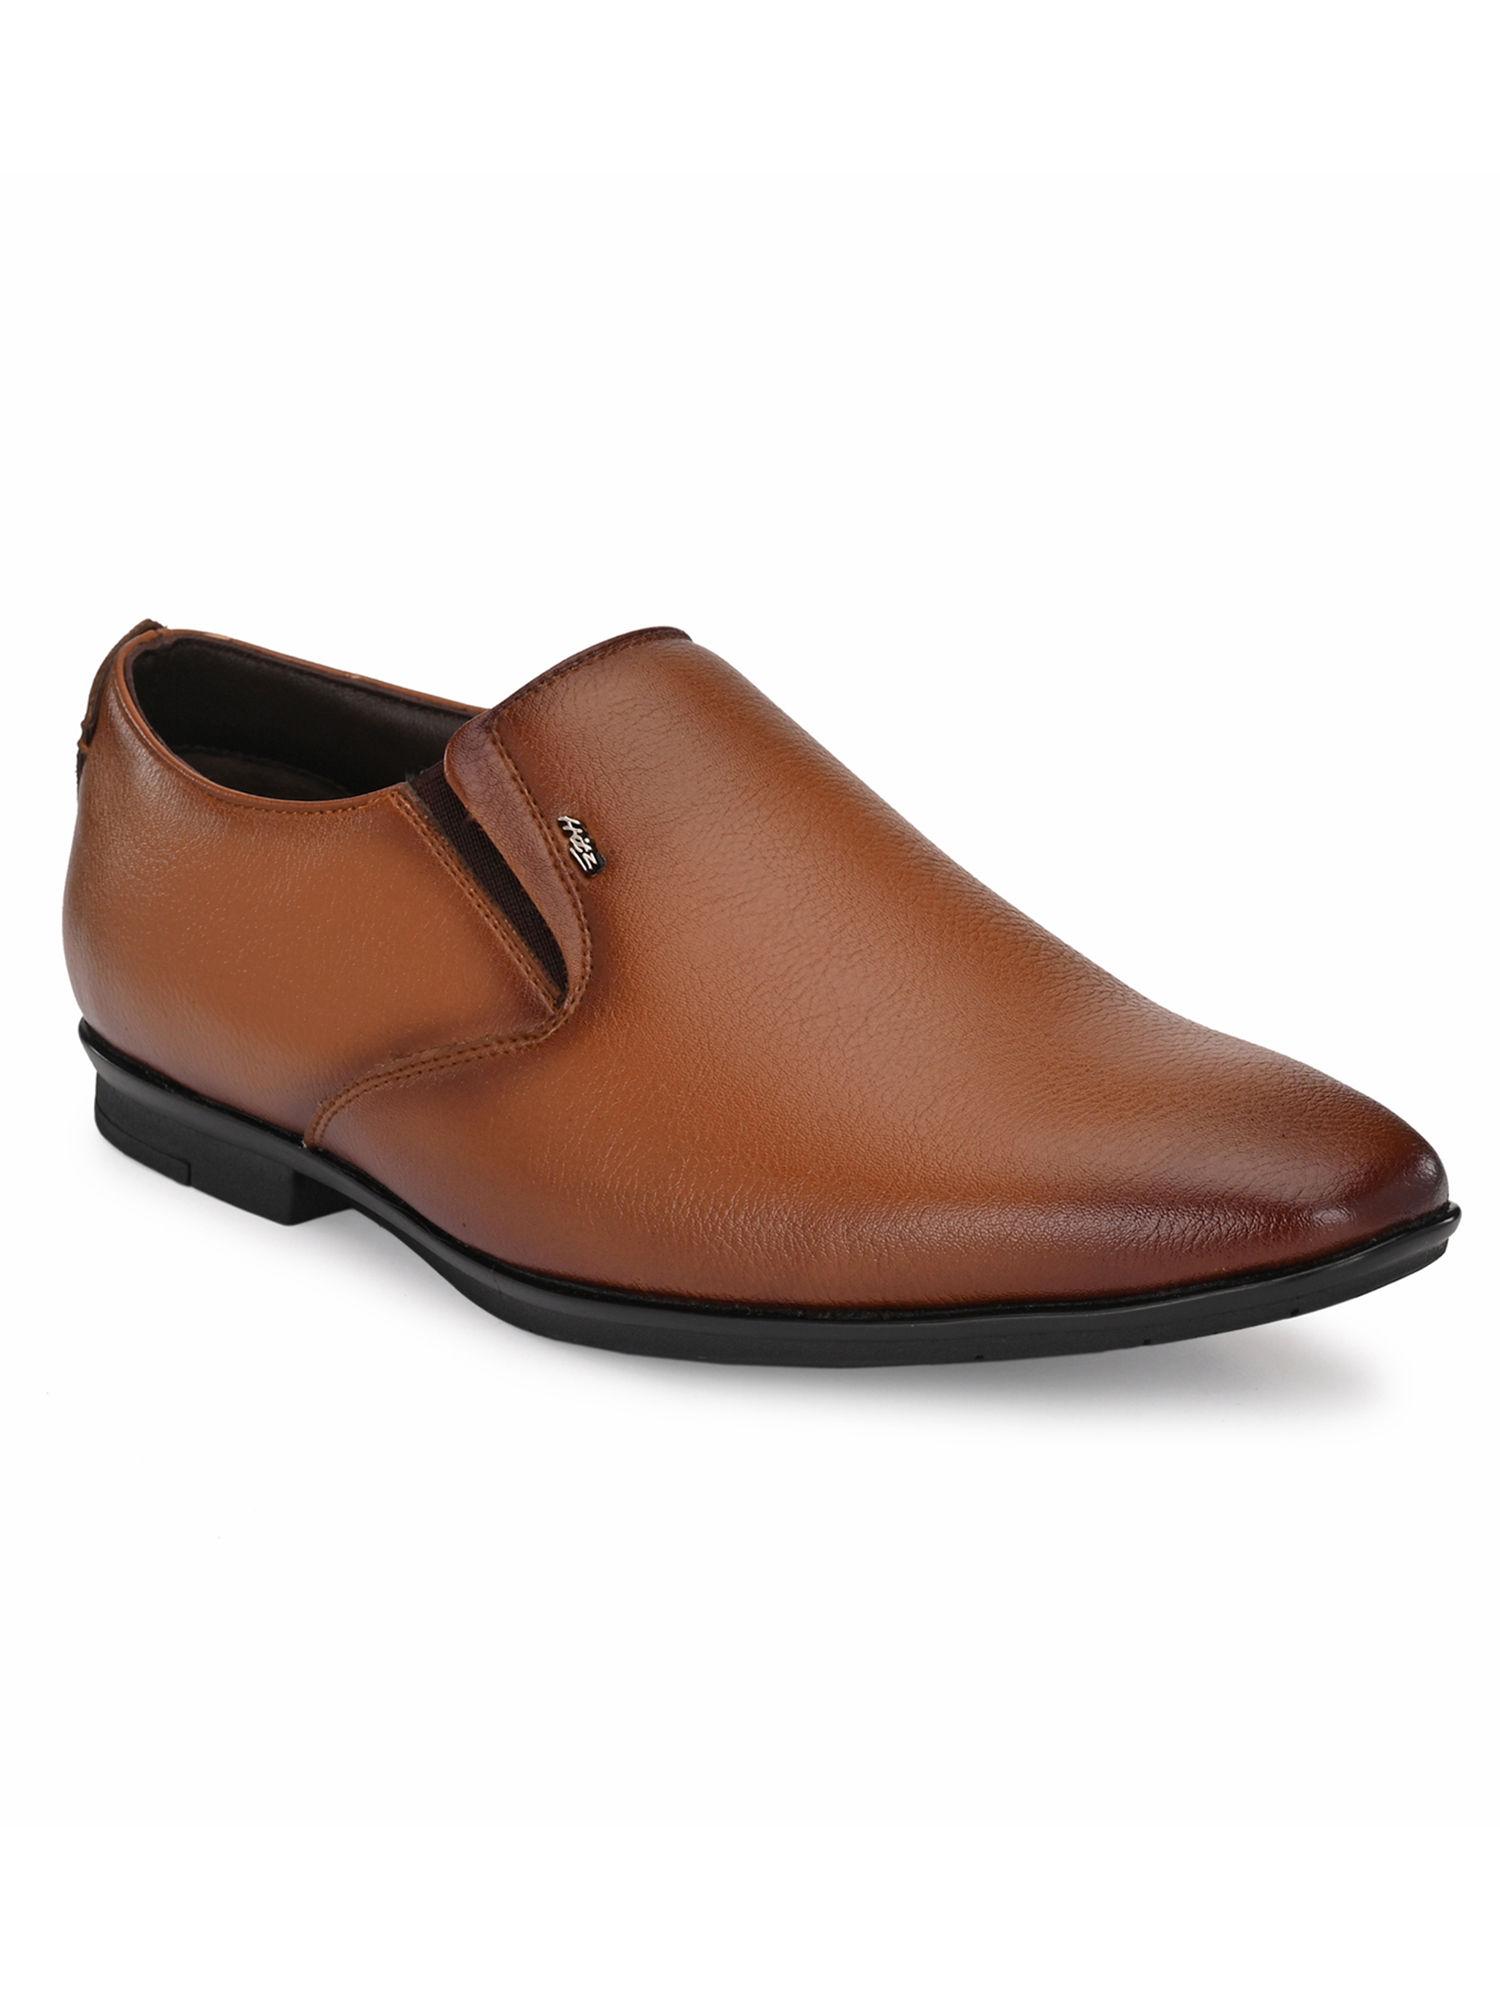 men's tan synthetic slip-on formal shoes